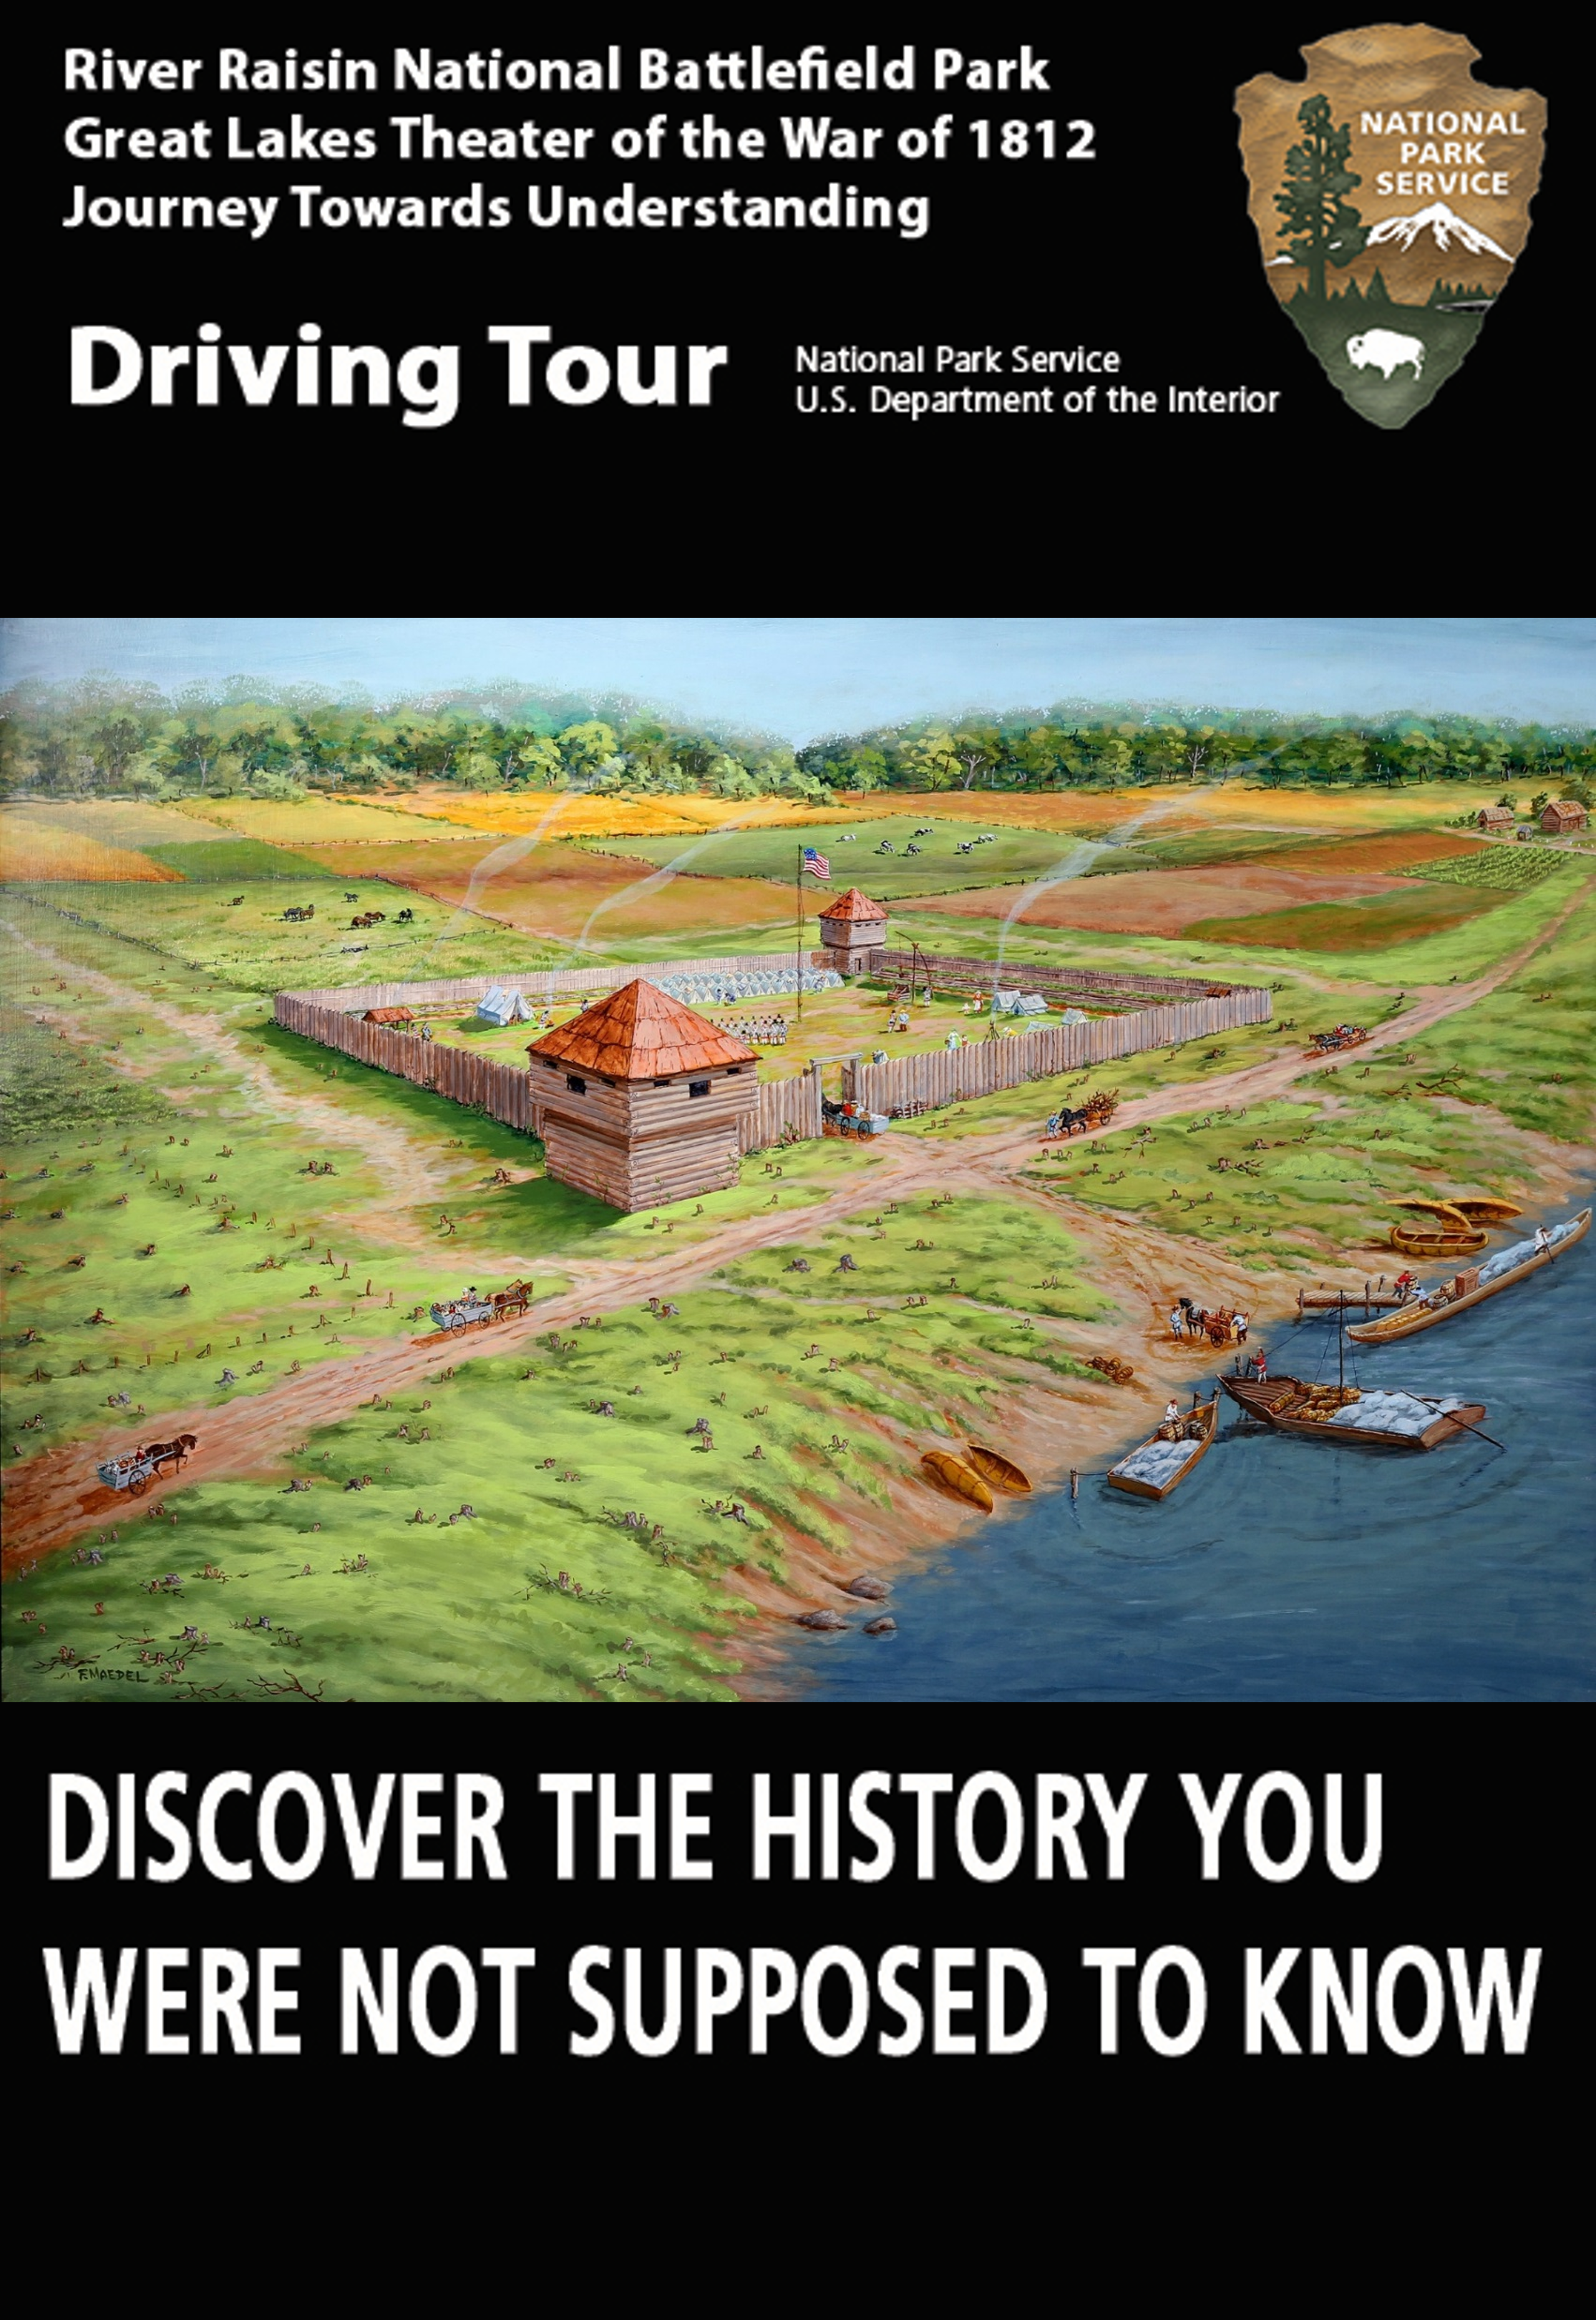 Cover of Driving Tour booklet